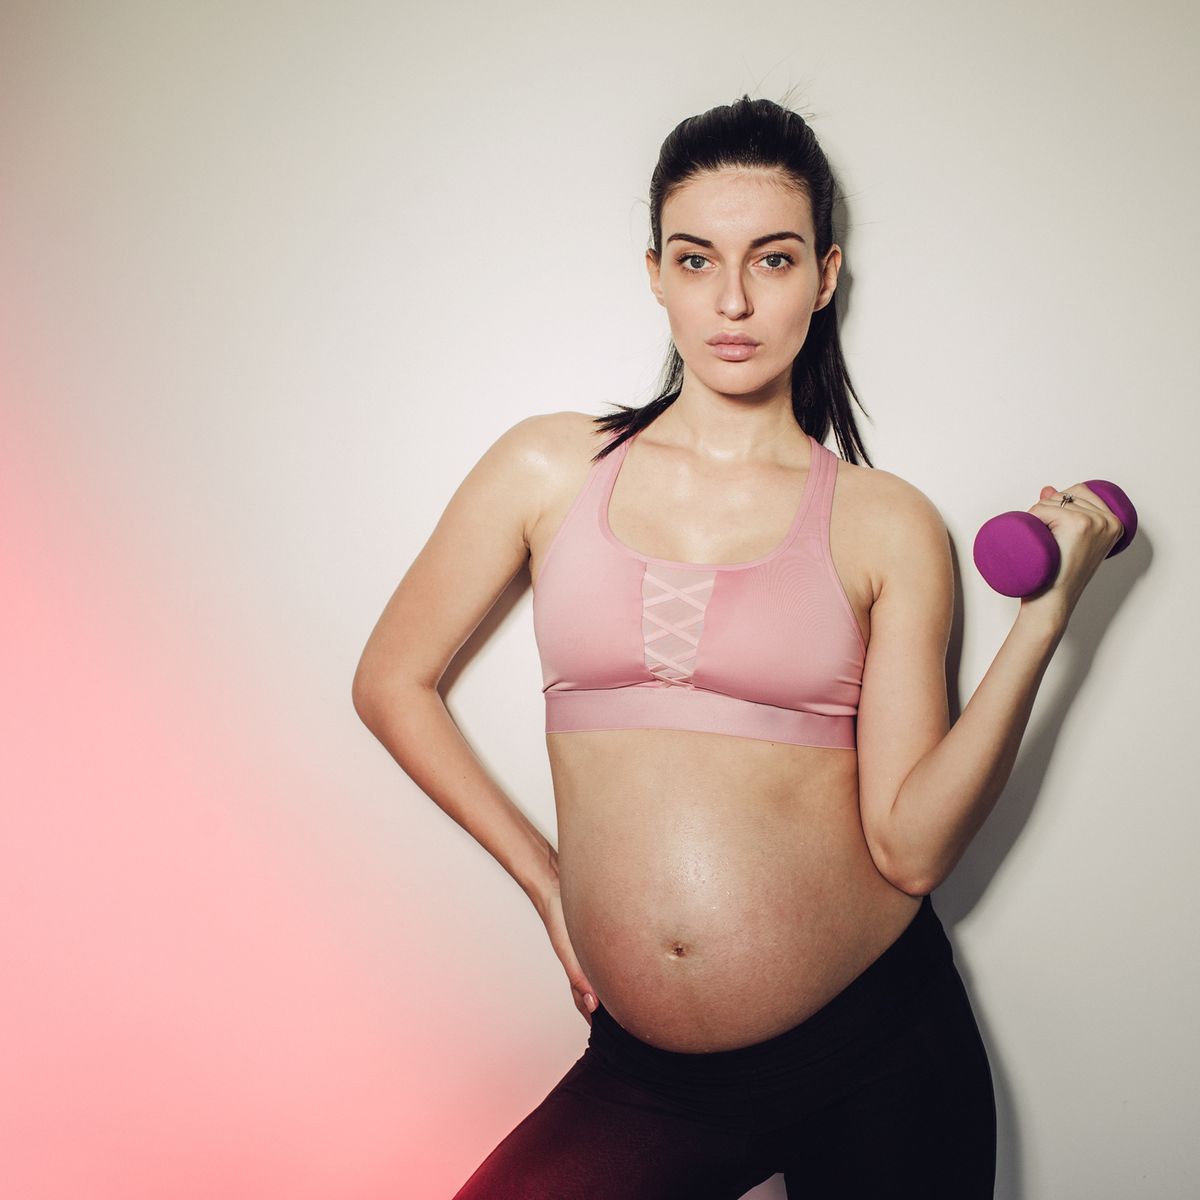 Pregnancy Exercises: Pregnancy Workouts For Each Trimester